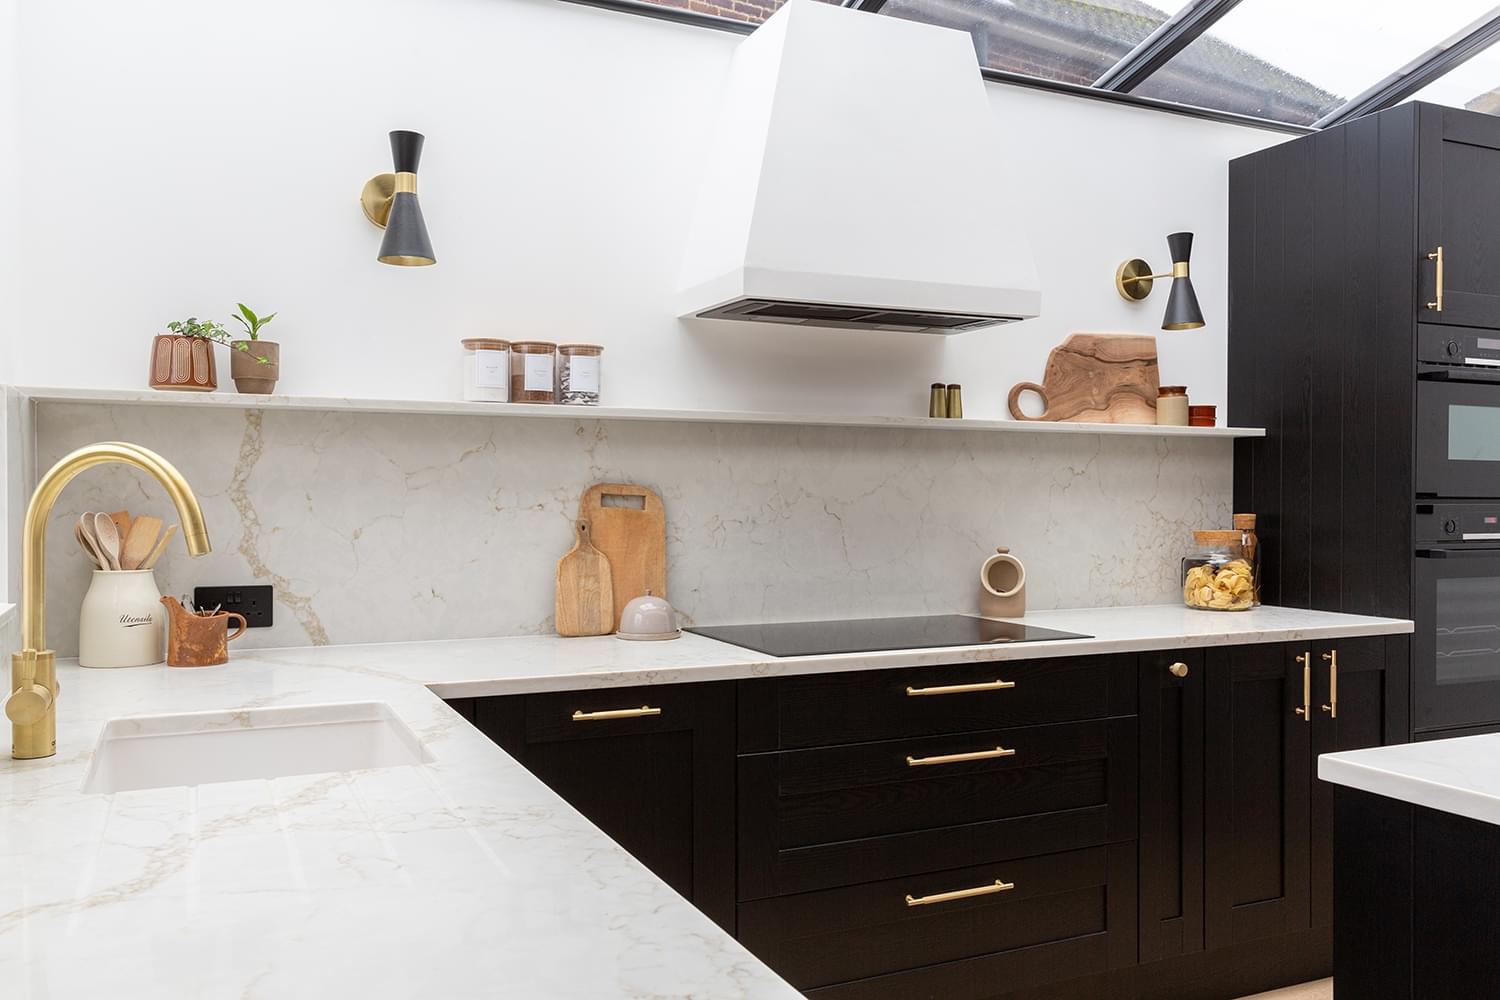 Marble effect worktops with black cabinetry